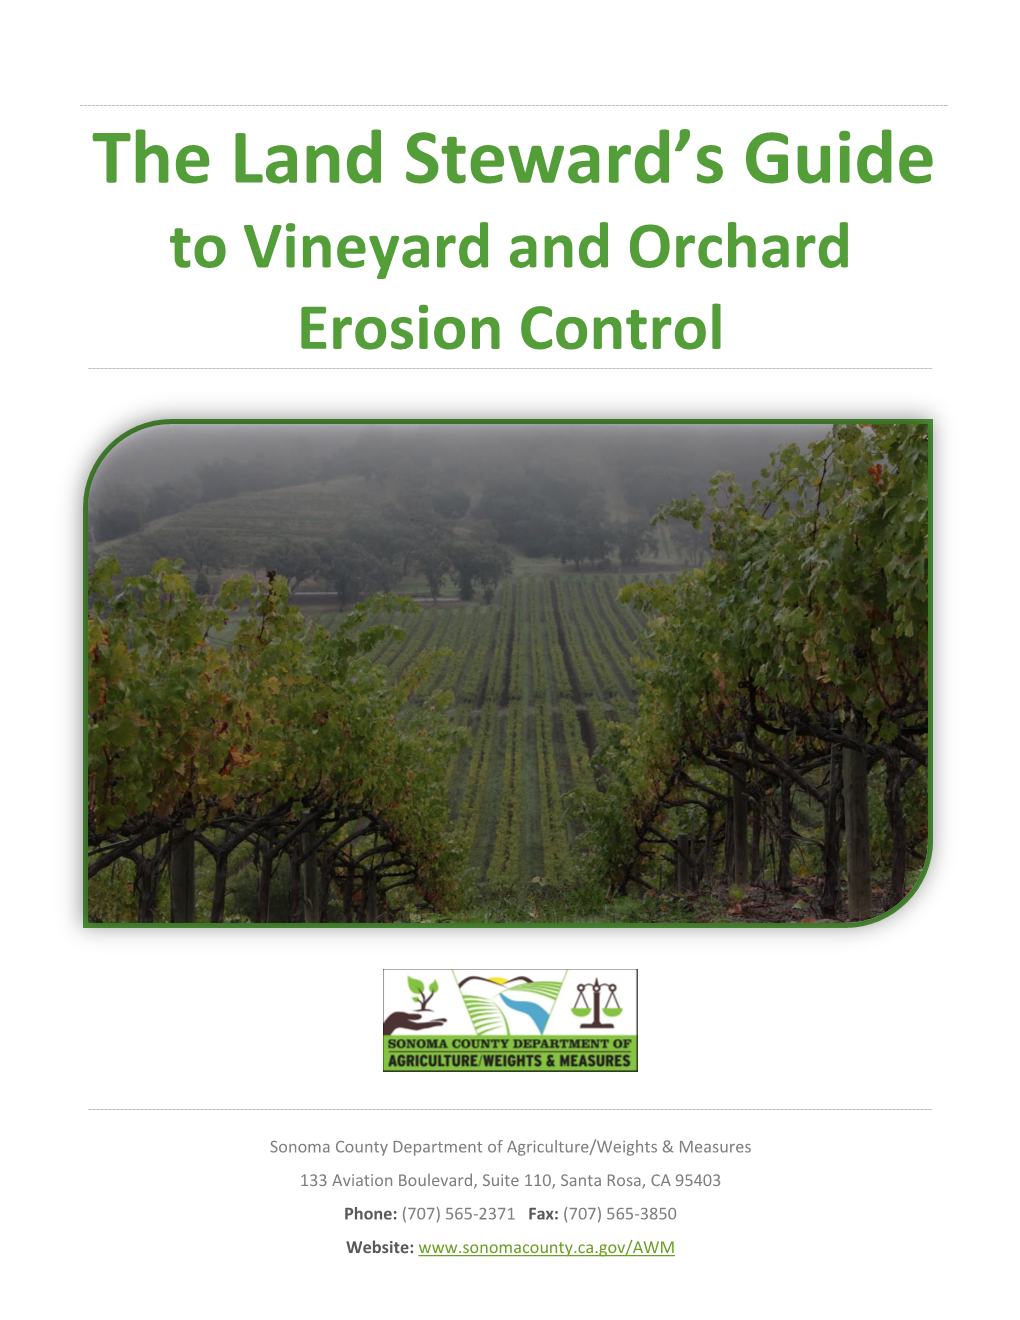 The Land Steward's Guide to Vineyard and Orchard Erosion Control